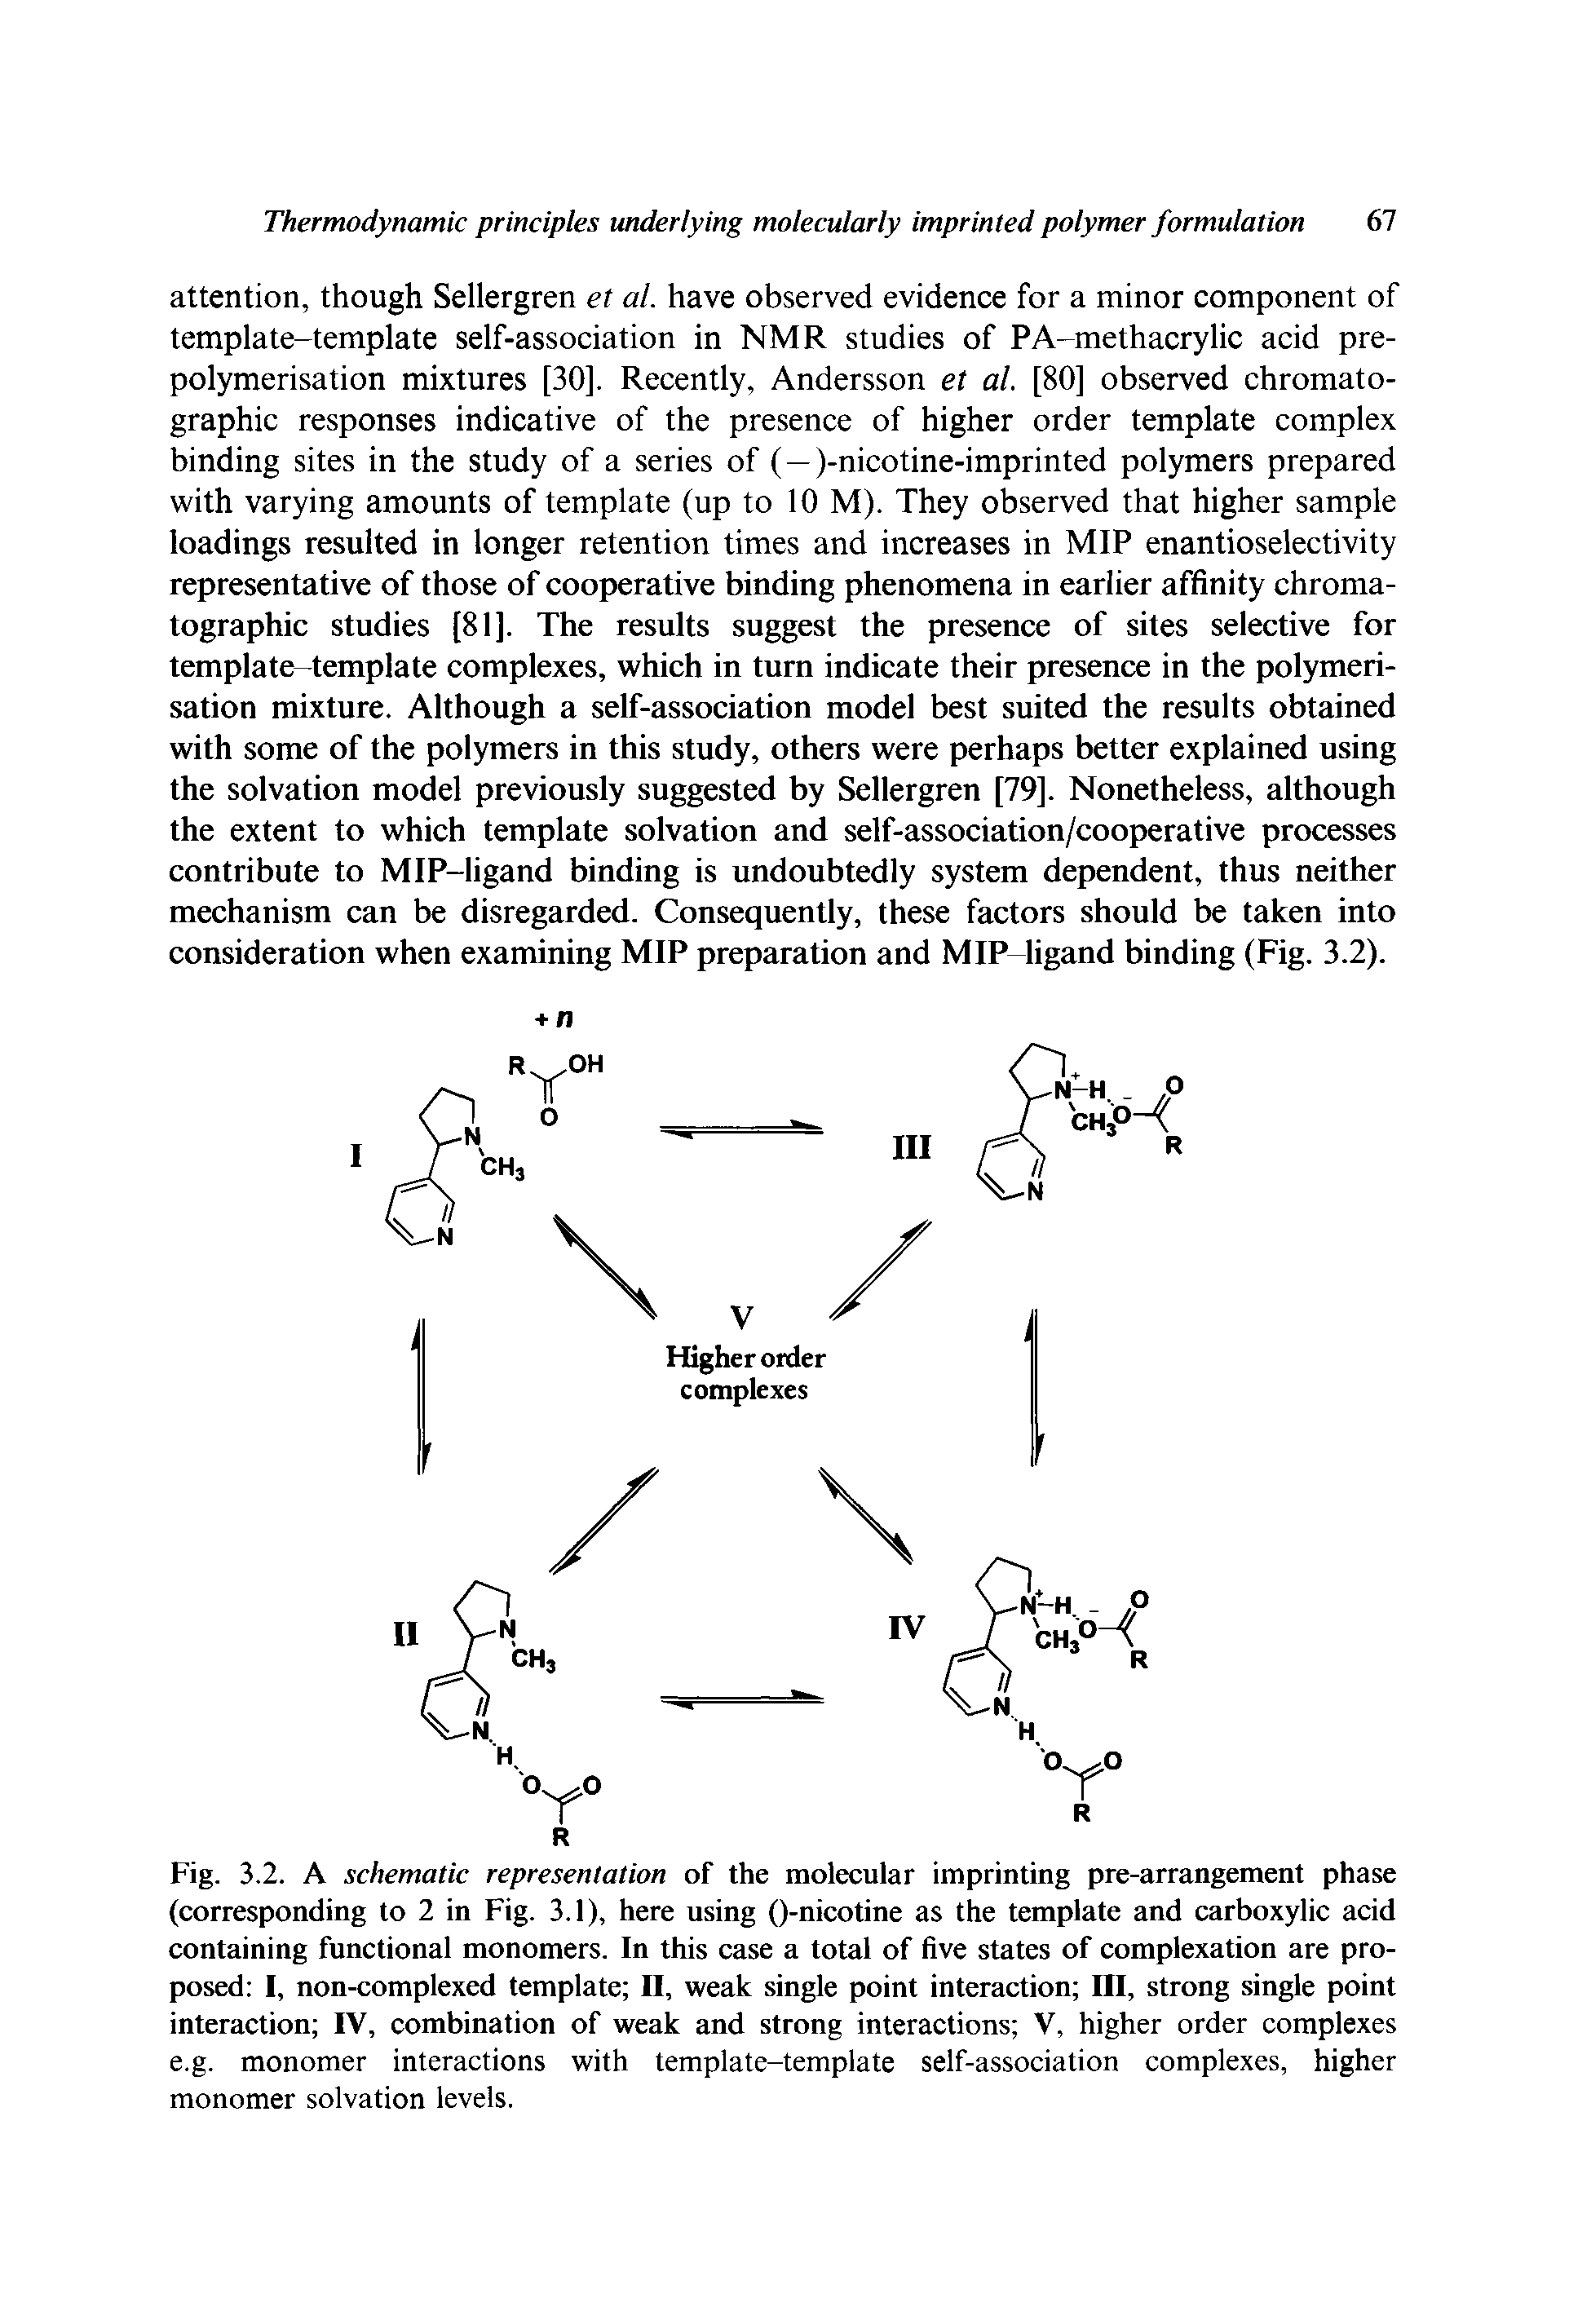 Fig. 3.2. A schematic representation of the molecular imprinting pre-arrangement phase (corresponding to 2 in Fig. 3.1), here using ()-nicotine as the template and carboxylic acid containing functional monomers. In this case a total of five states of complexation are proposed I, non-complexed template II, weak single point interaction III, strong single point interaction IV, combination of weak and strong interactions V, higher order complexes e.g. monomer interactions with template-template self-association complexes, higher monomer solvation levels.